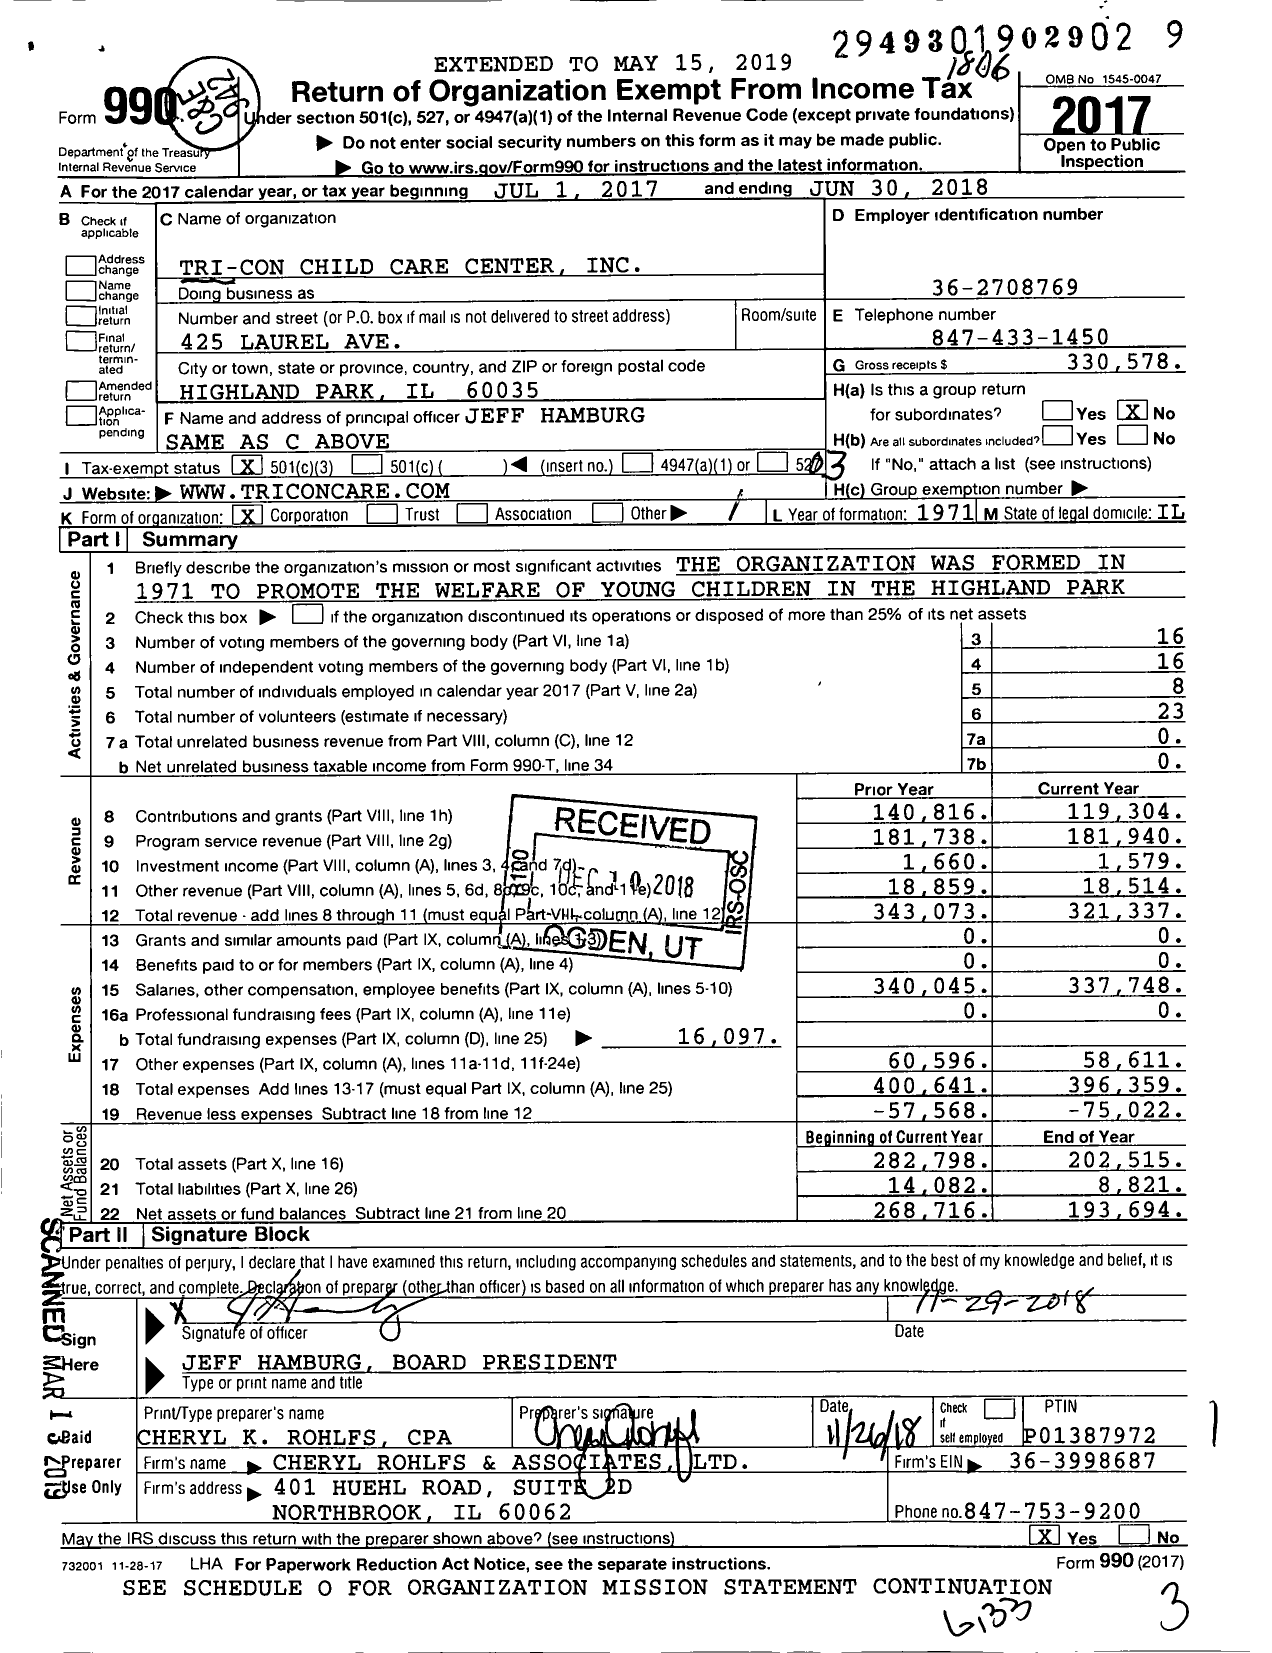 Image of first page of 2017 Form 990 for Tri-Con Child Care Center